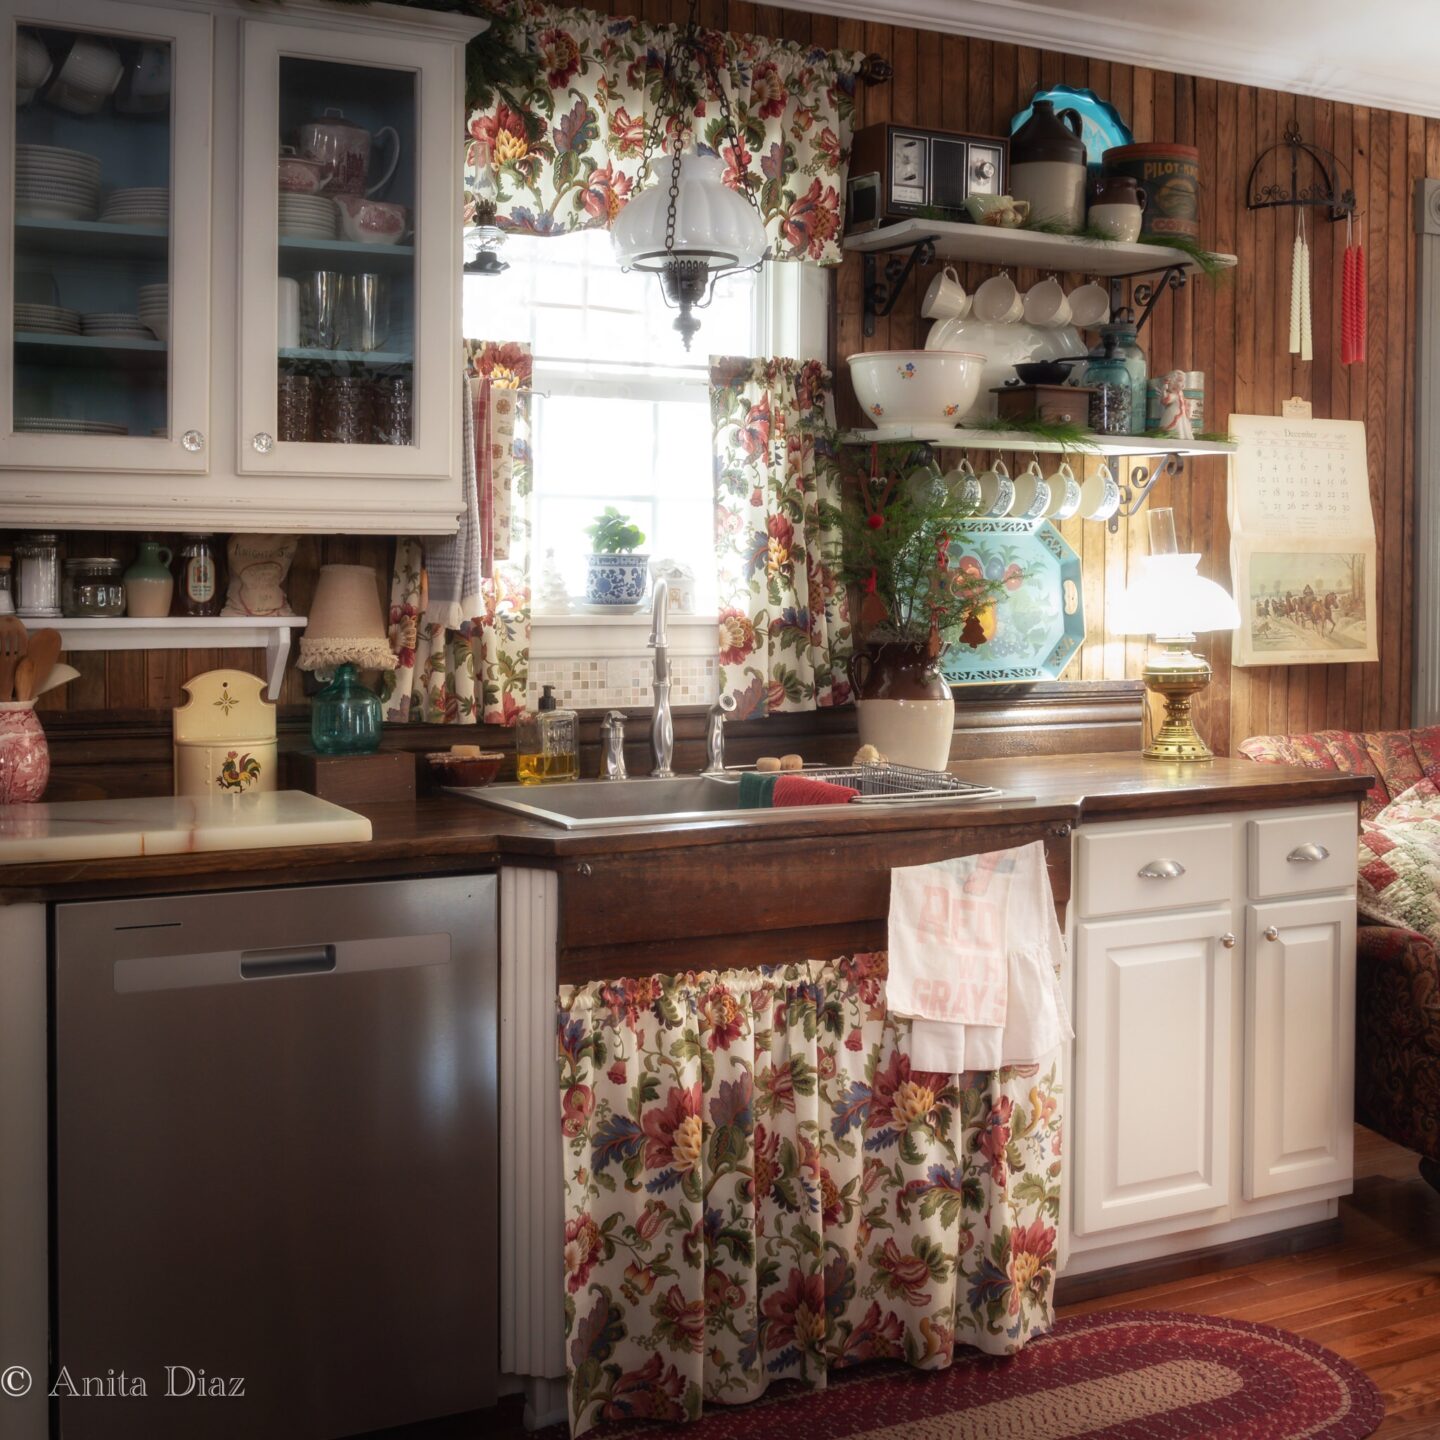 Farmhouse Christmas Kitchen inspired by "The Waltons"